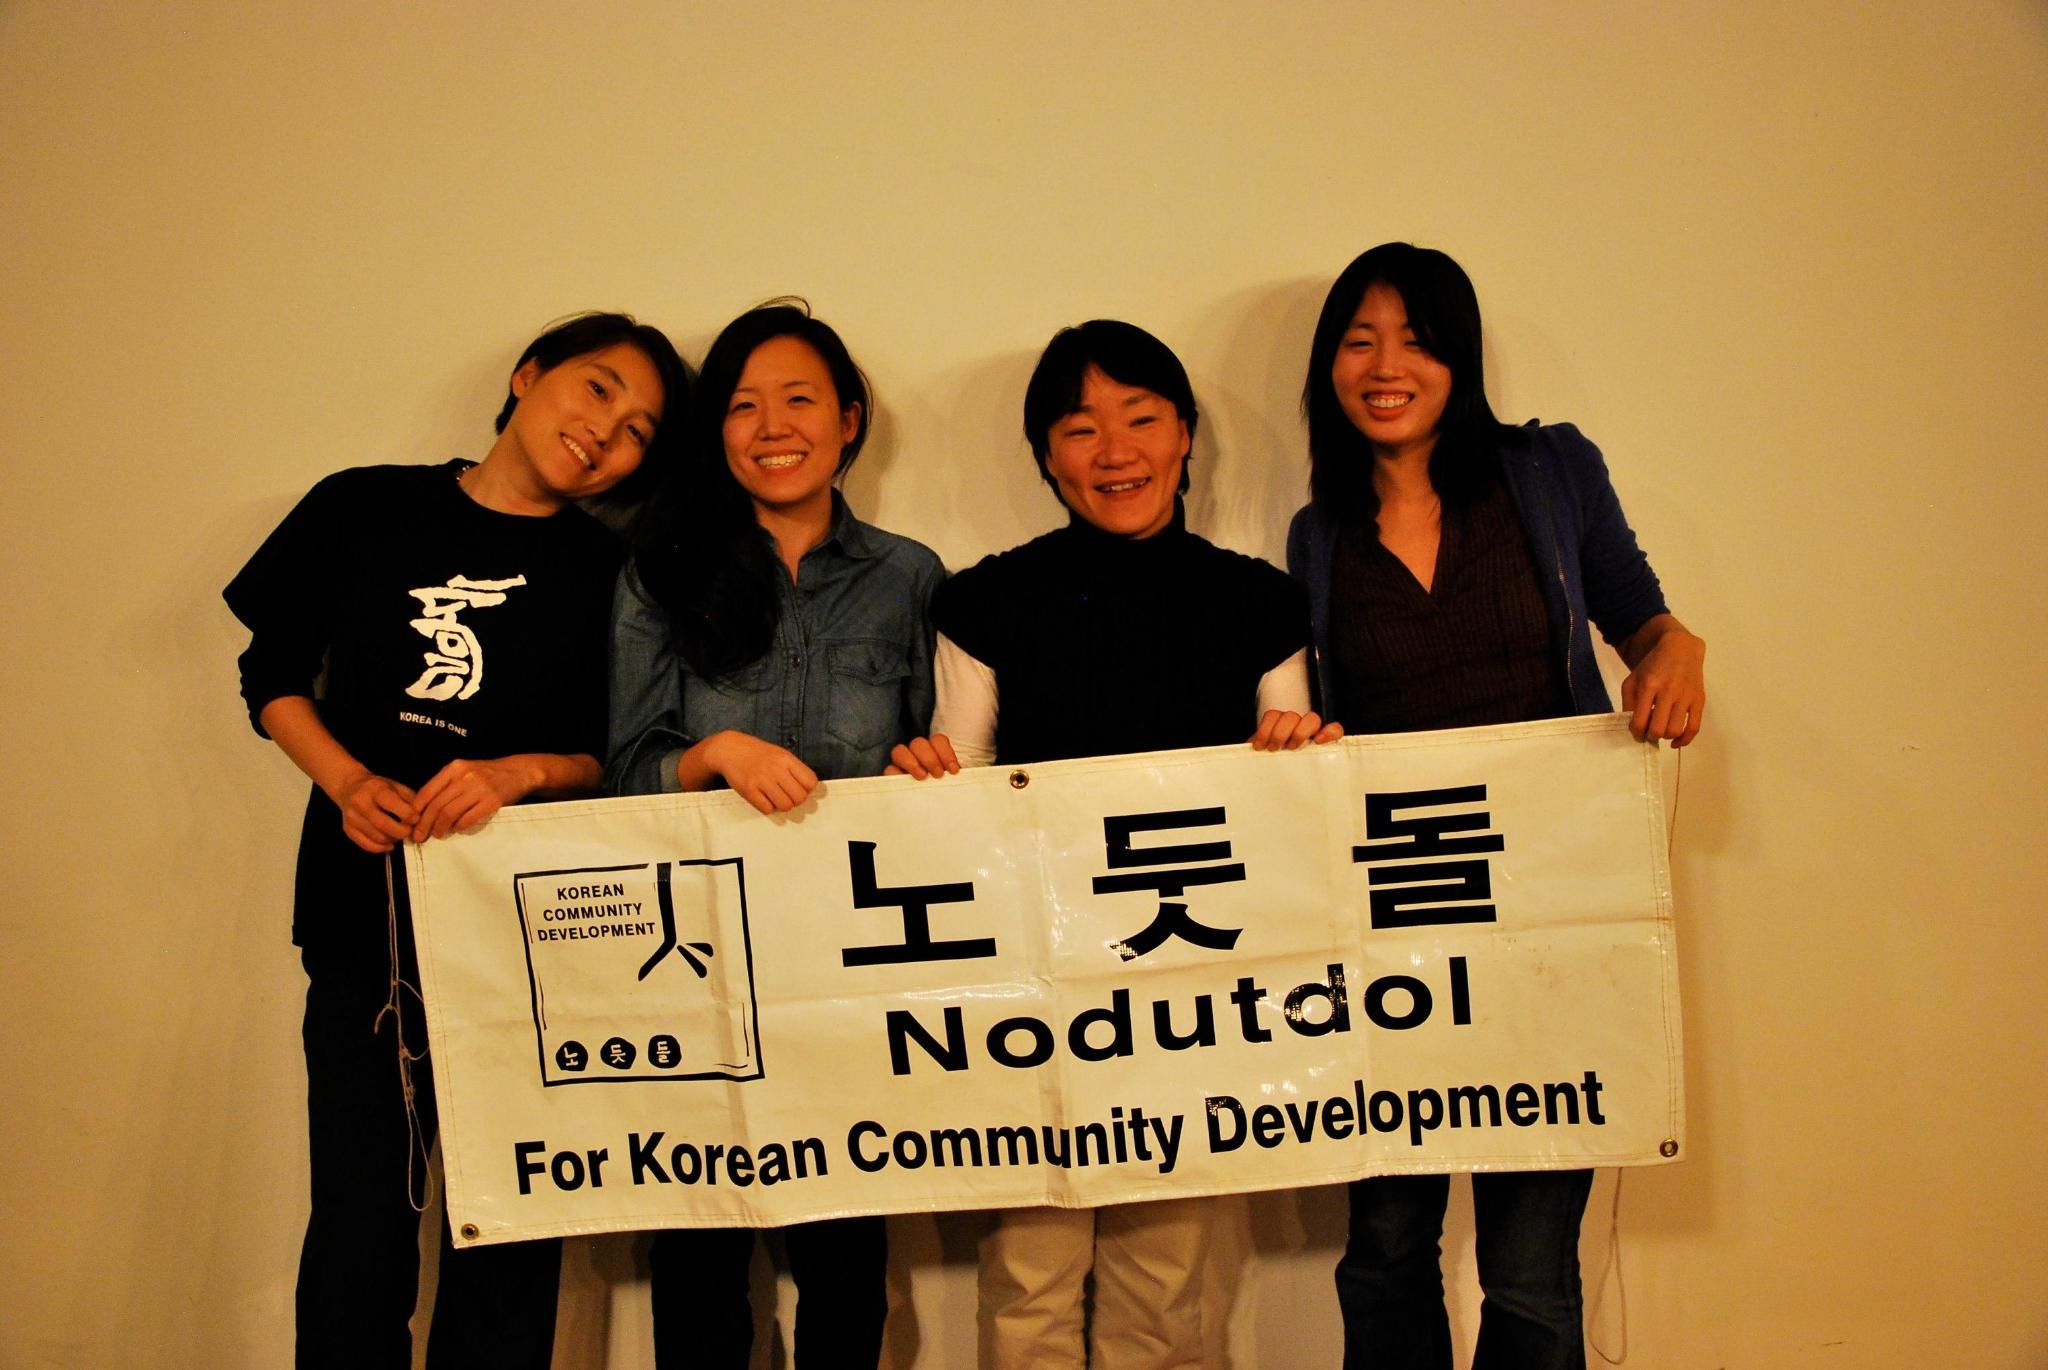 Four Korean women hold up a Nodutdol banner. They are smiling and looking into the camera.